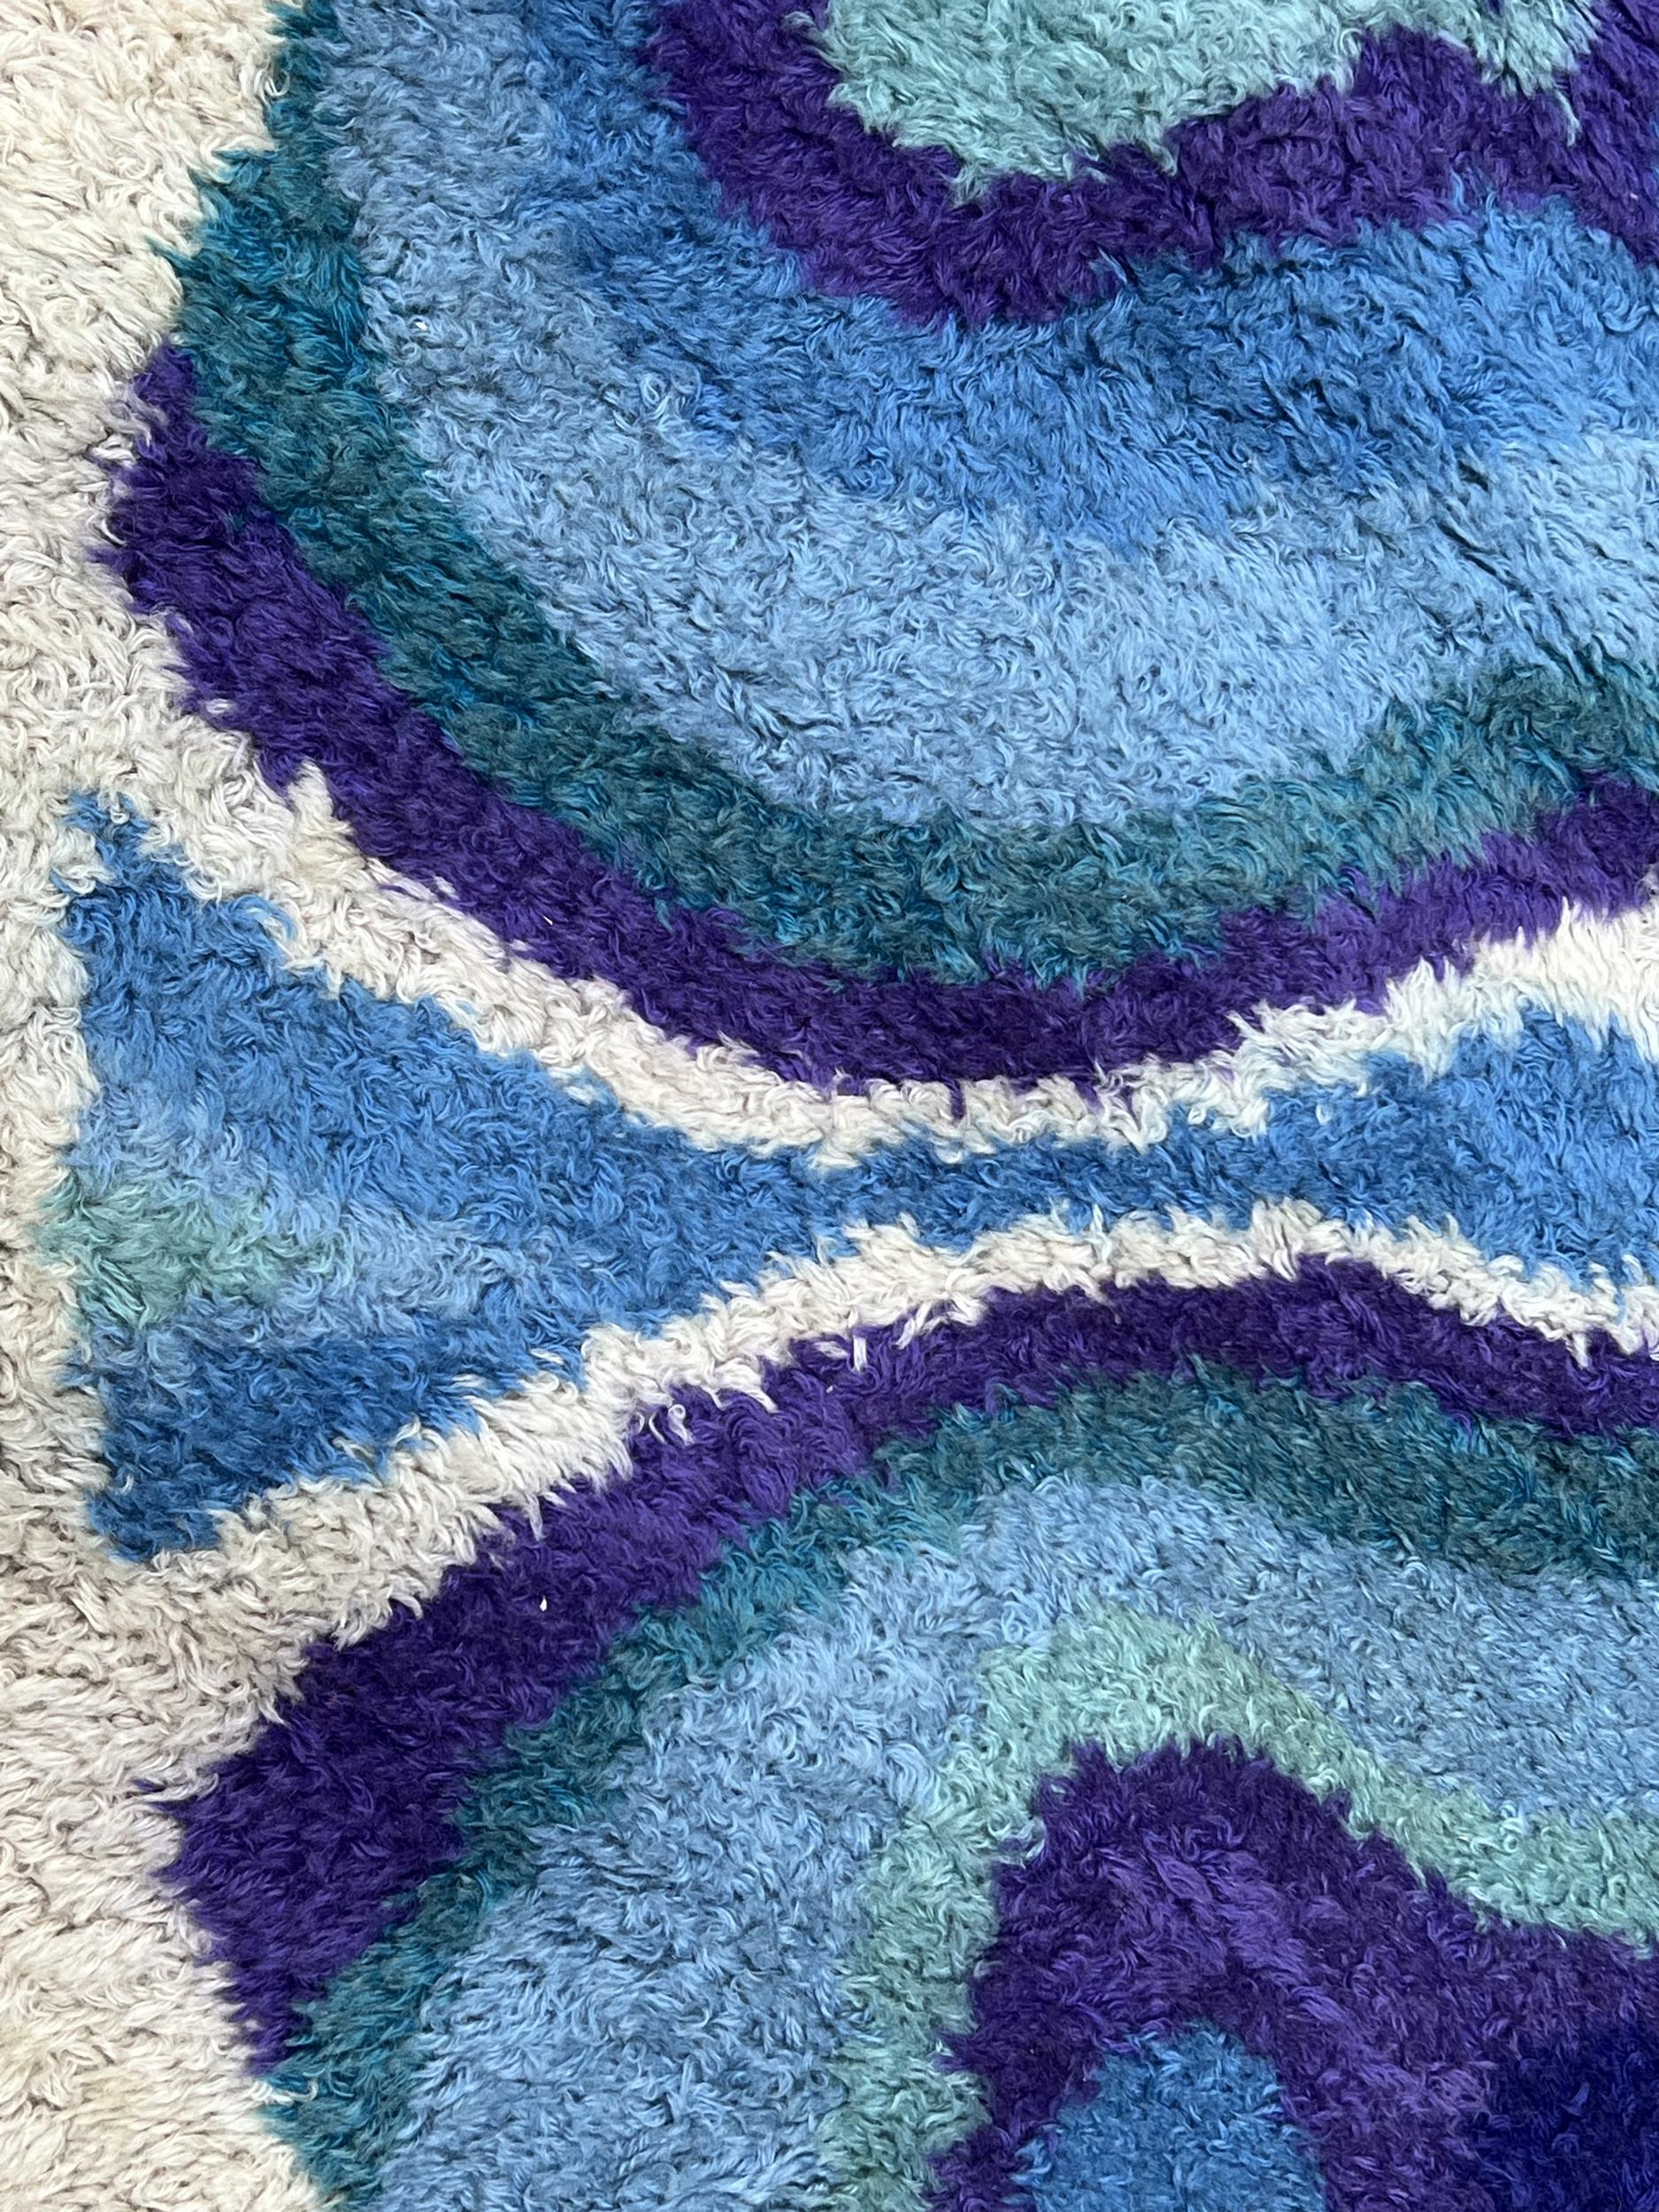 Interesting round rug in curly wool with « psychedelic » decoration, very typical of the 70s.
Dark blue, light blue, turquoise, dark green, water green and violet scrolls and arabesques on an off-white background.